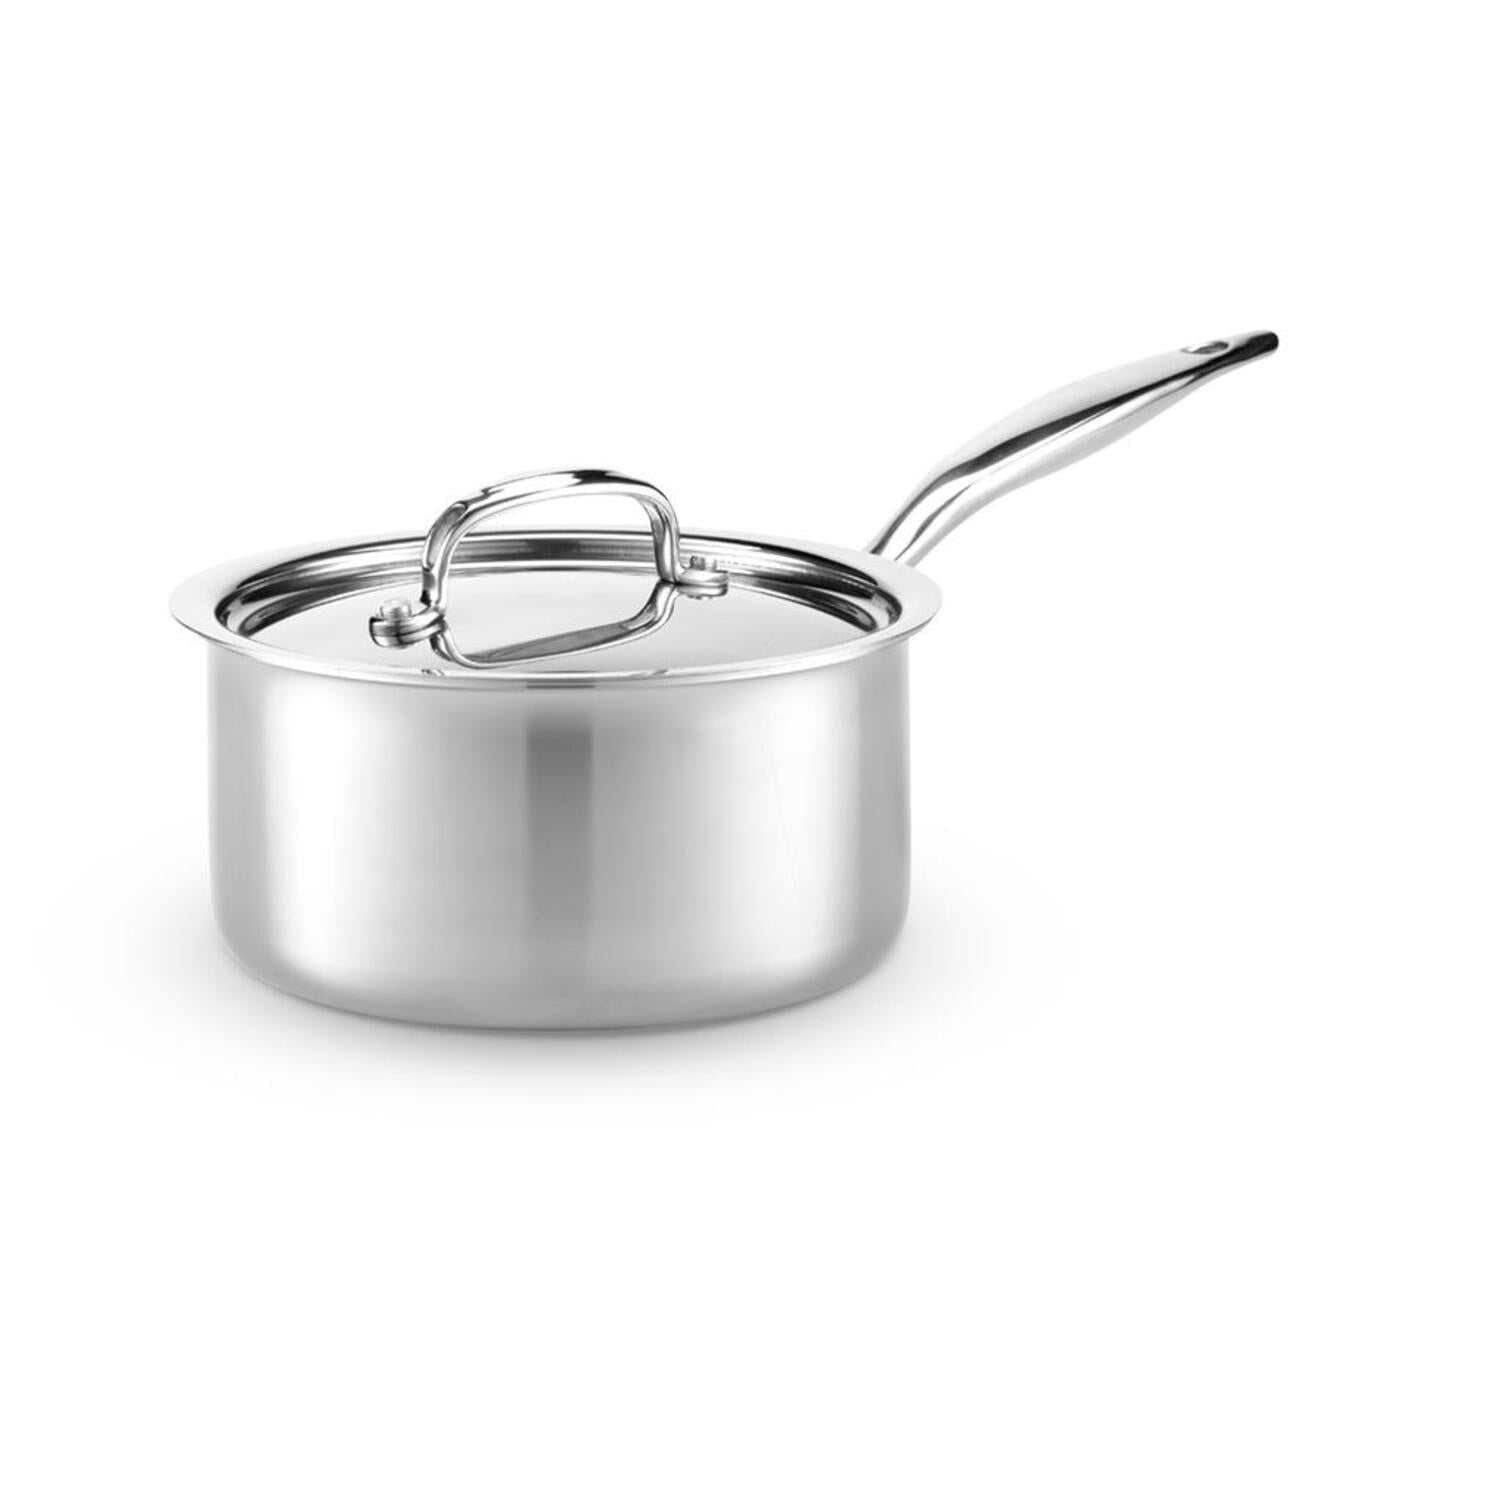 2-Quart Stainless Steel Sauce Pan Small Soup Pot with Lid - China